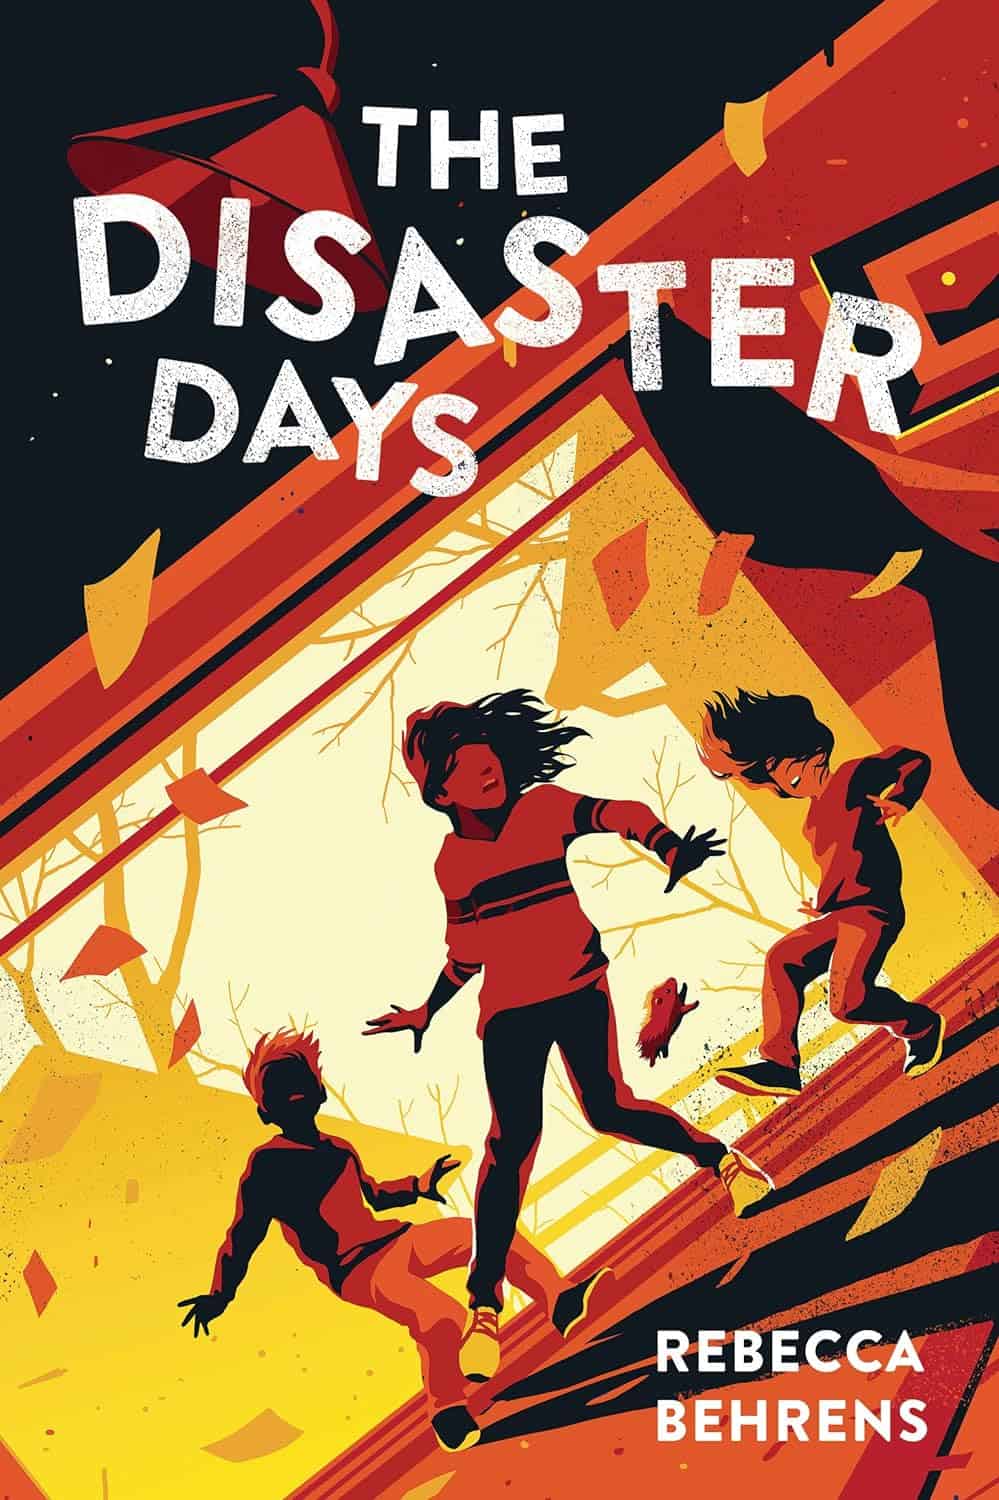 The Disaster Days, by Rebecca Behrens